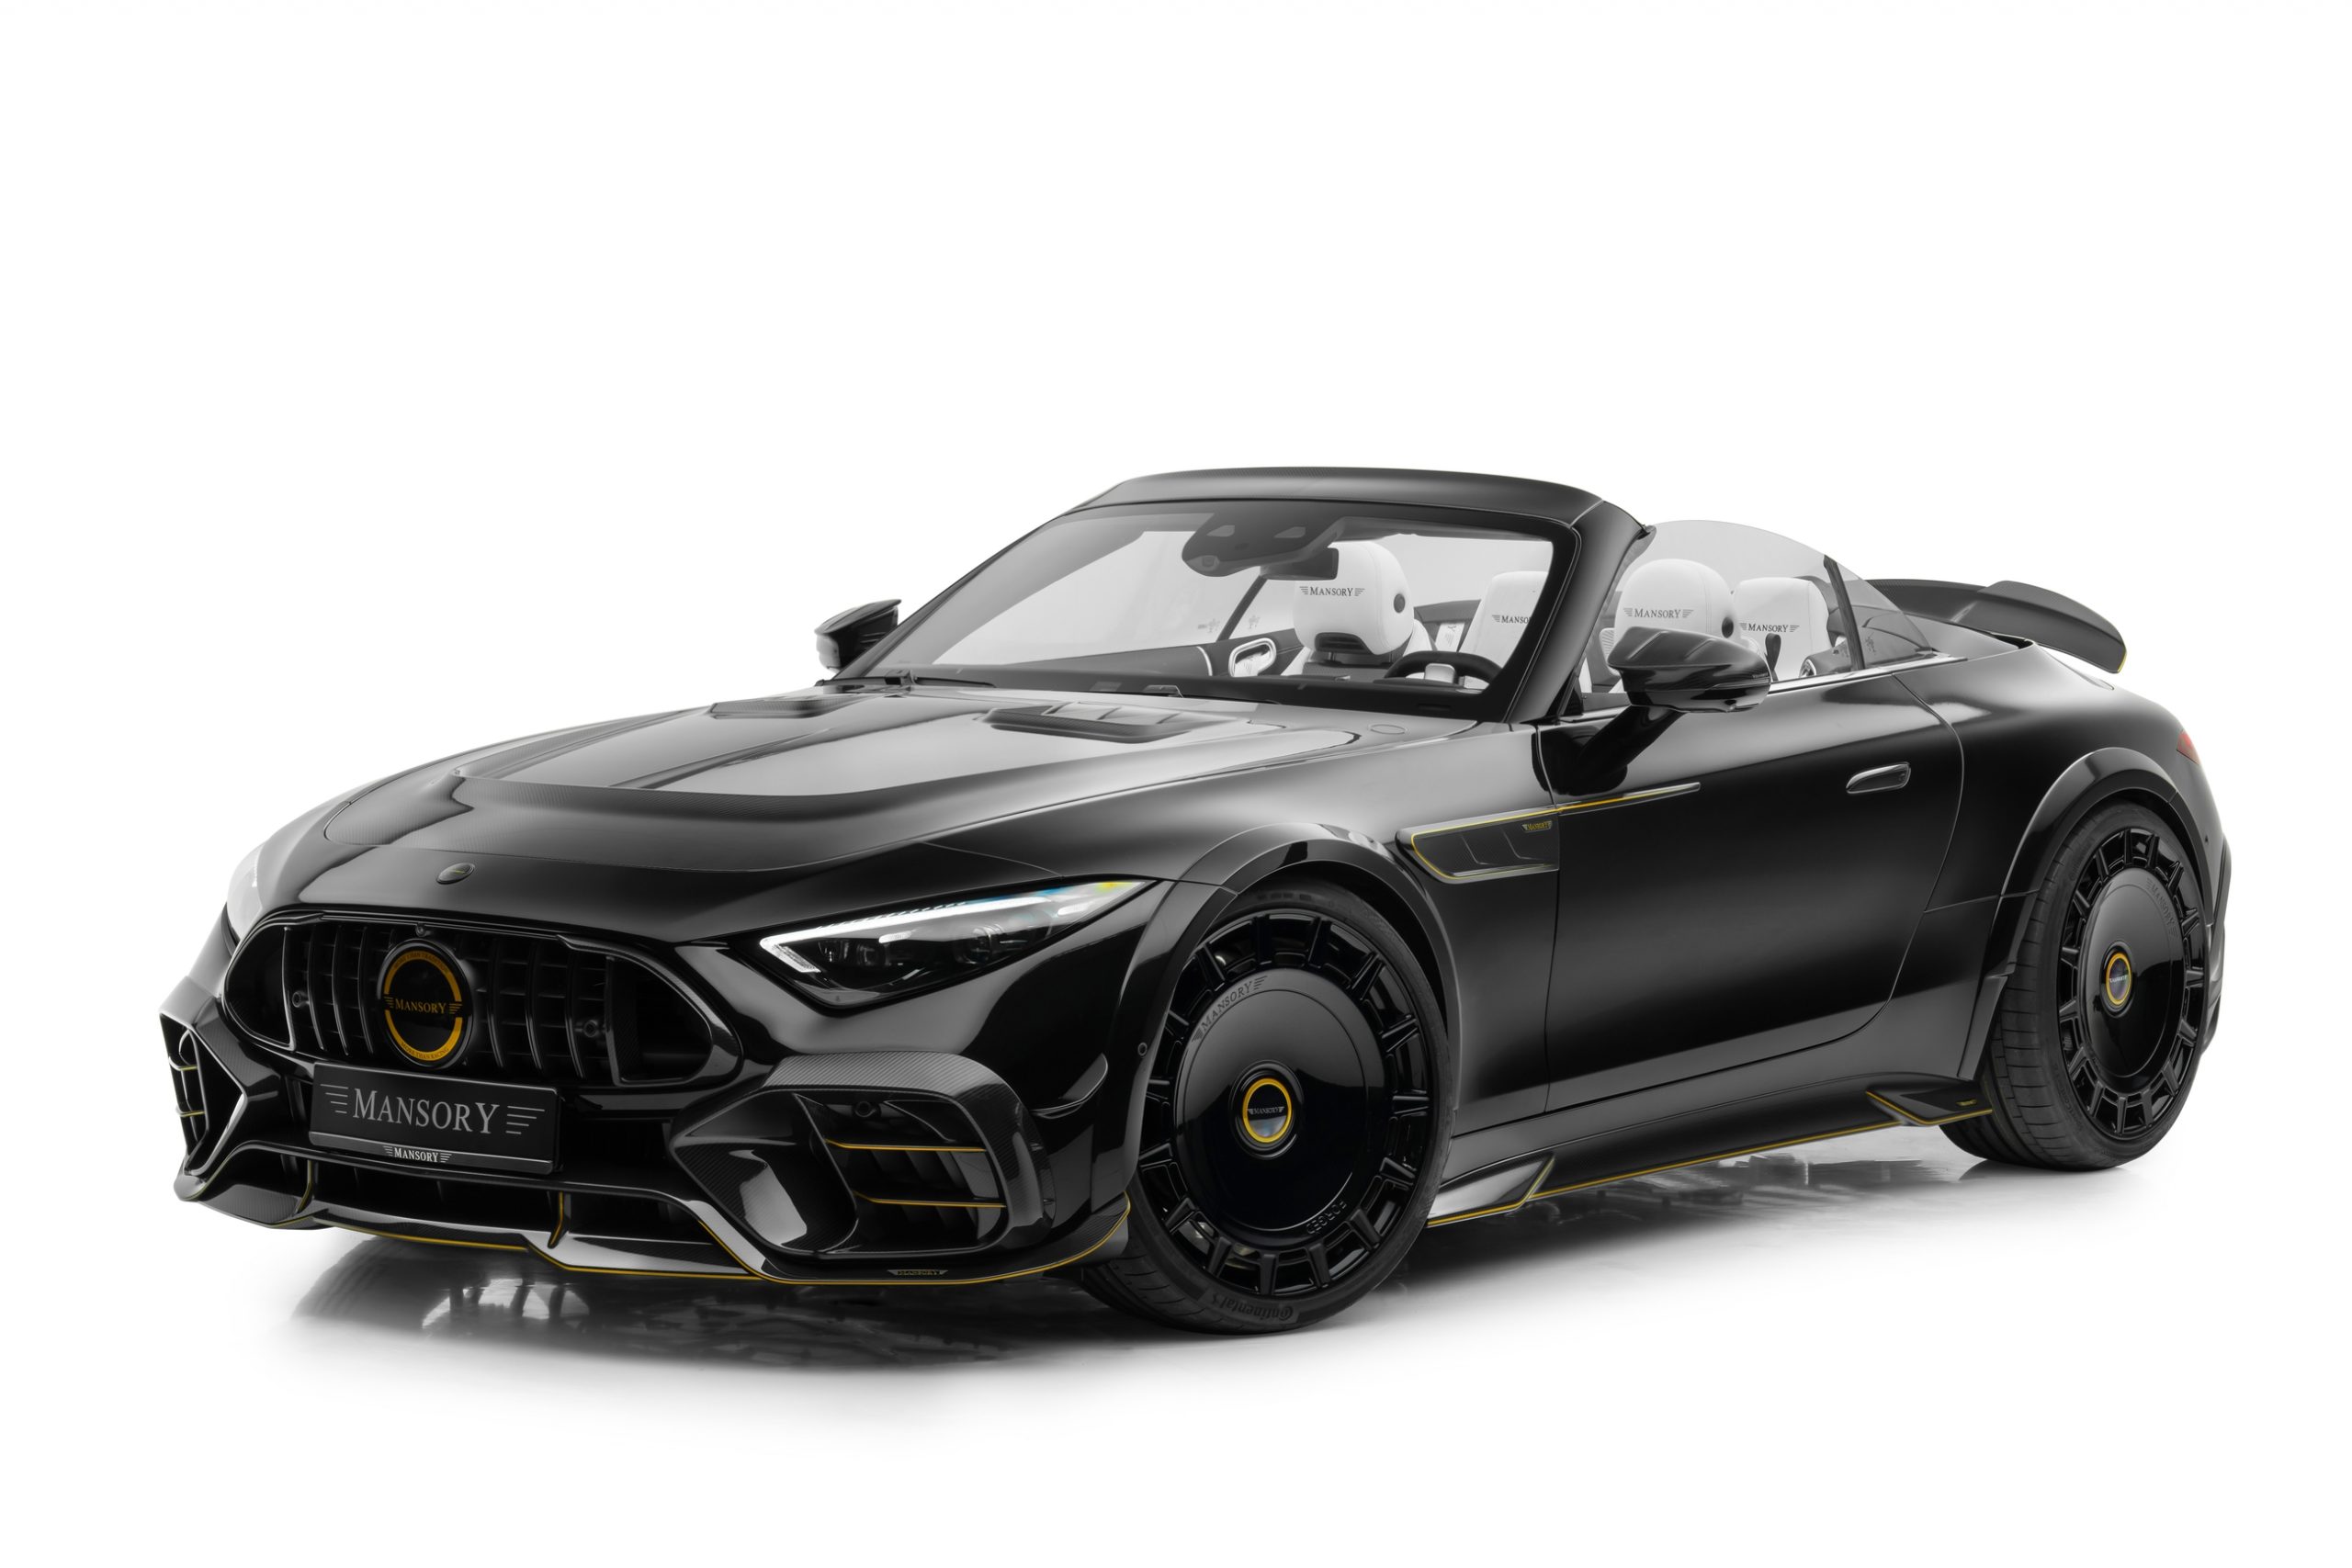 Video Highlights The Mansory P850 Package For The AMG SL 63